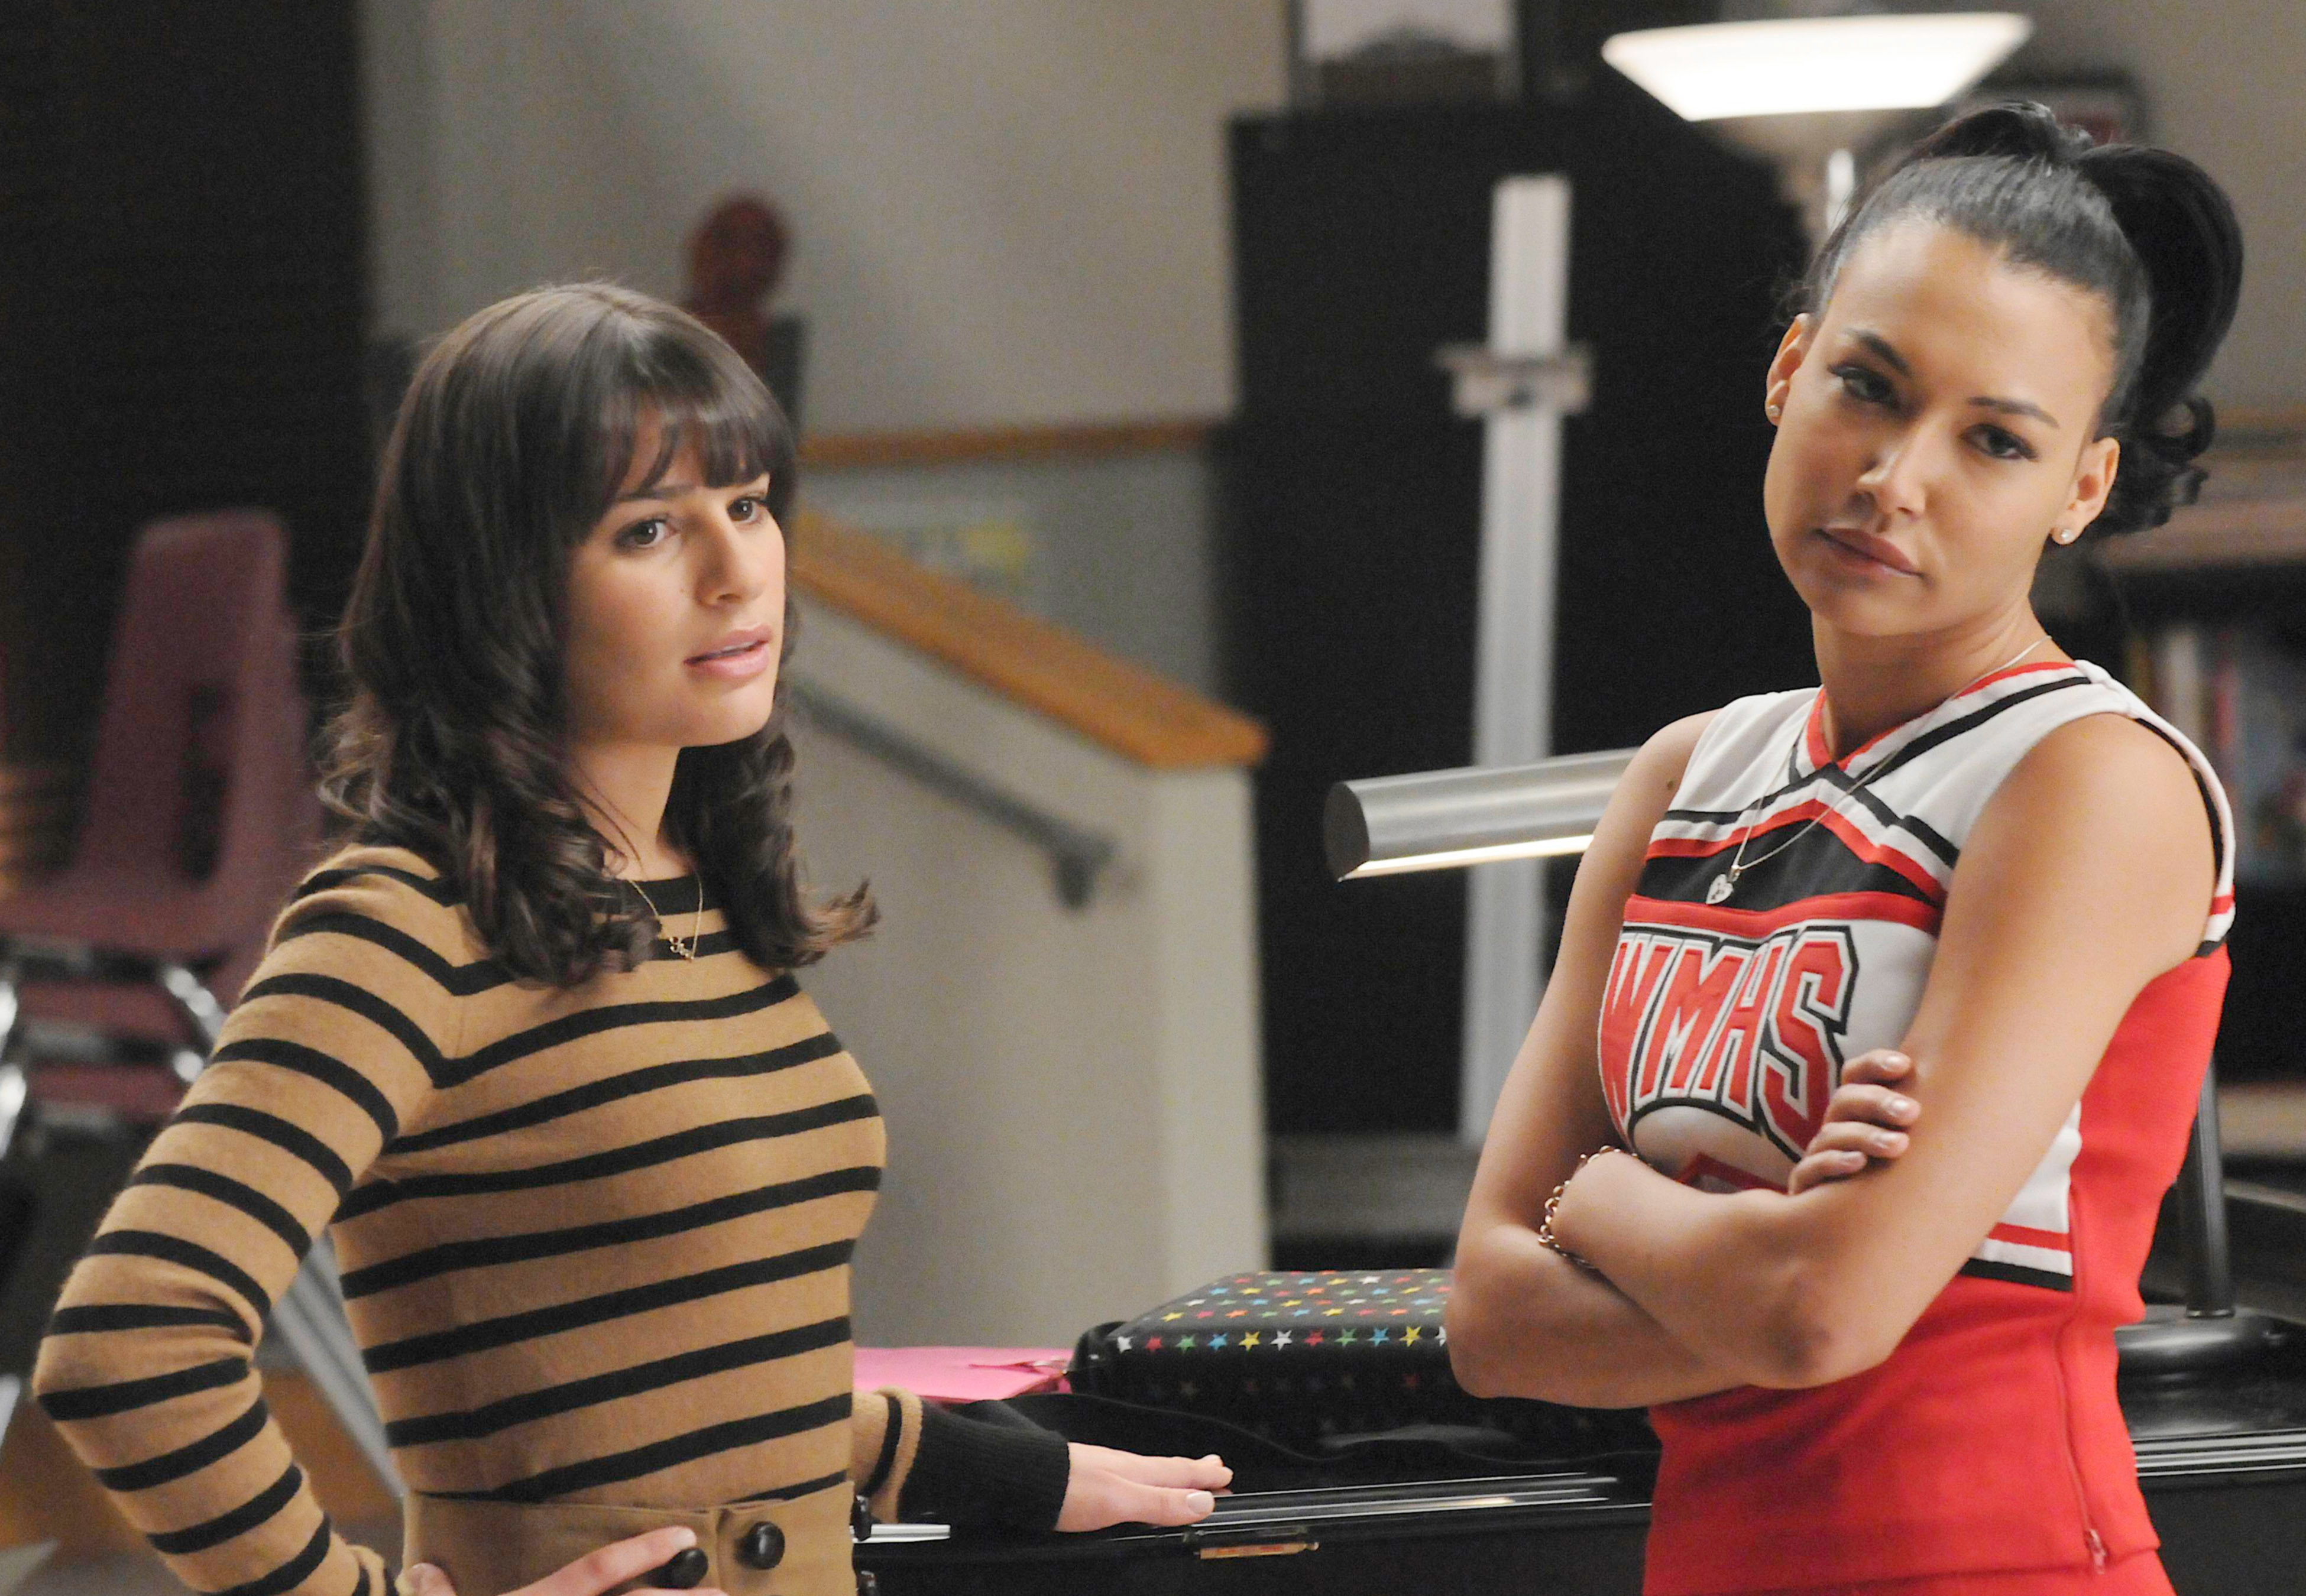 Two characters from Glee, Rachel in a striped top and Santana in a cheerleader outfit, stand facing each other with serious expressions